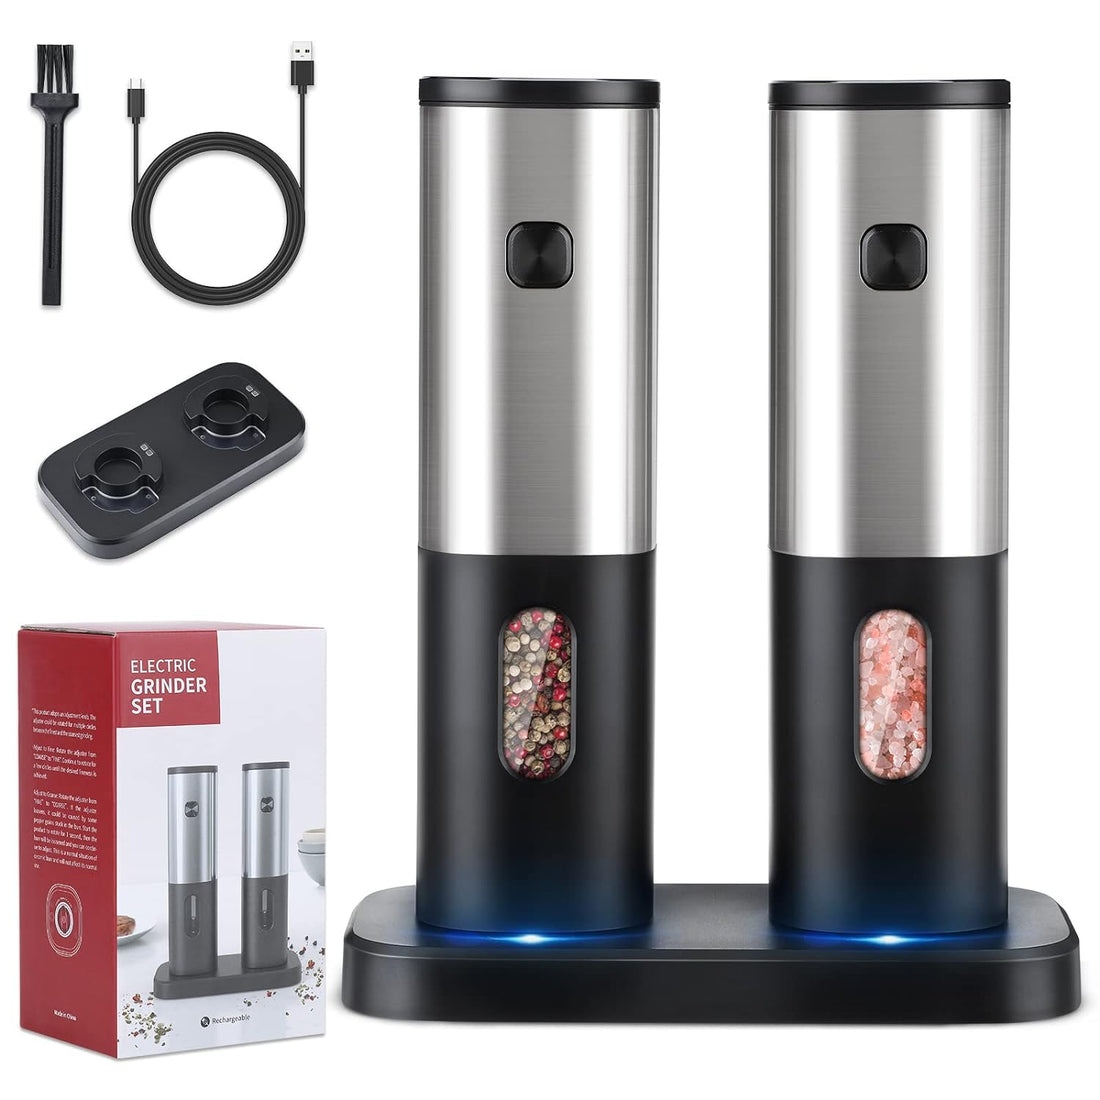 Electric Salt and Pepper Grinder Set, HOMCYTOP Automatic Salt & Pepper Mill Refillable with Rechargeable Base, USB Cables, Blue LED Light, One Hand Operation, 2 Adjustable Coarseness Mills